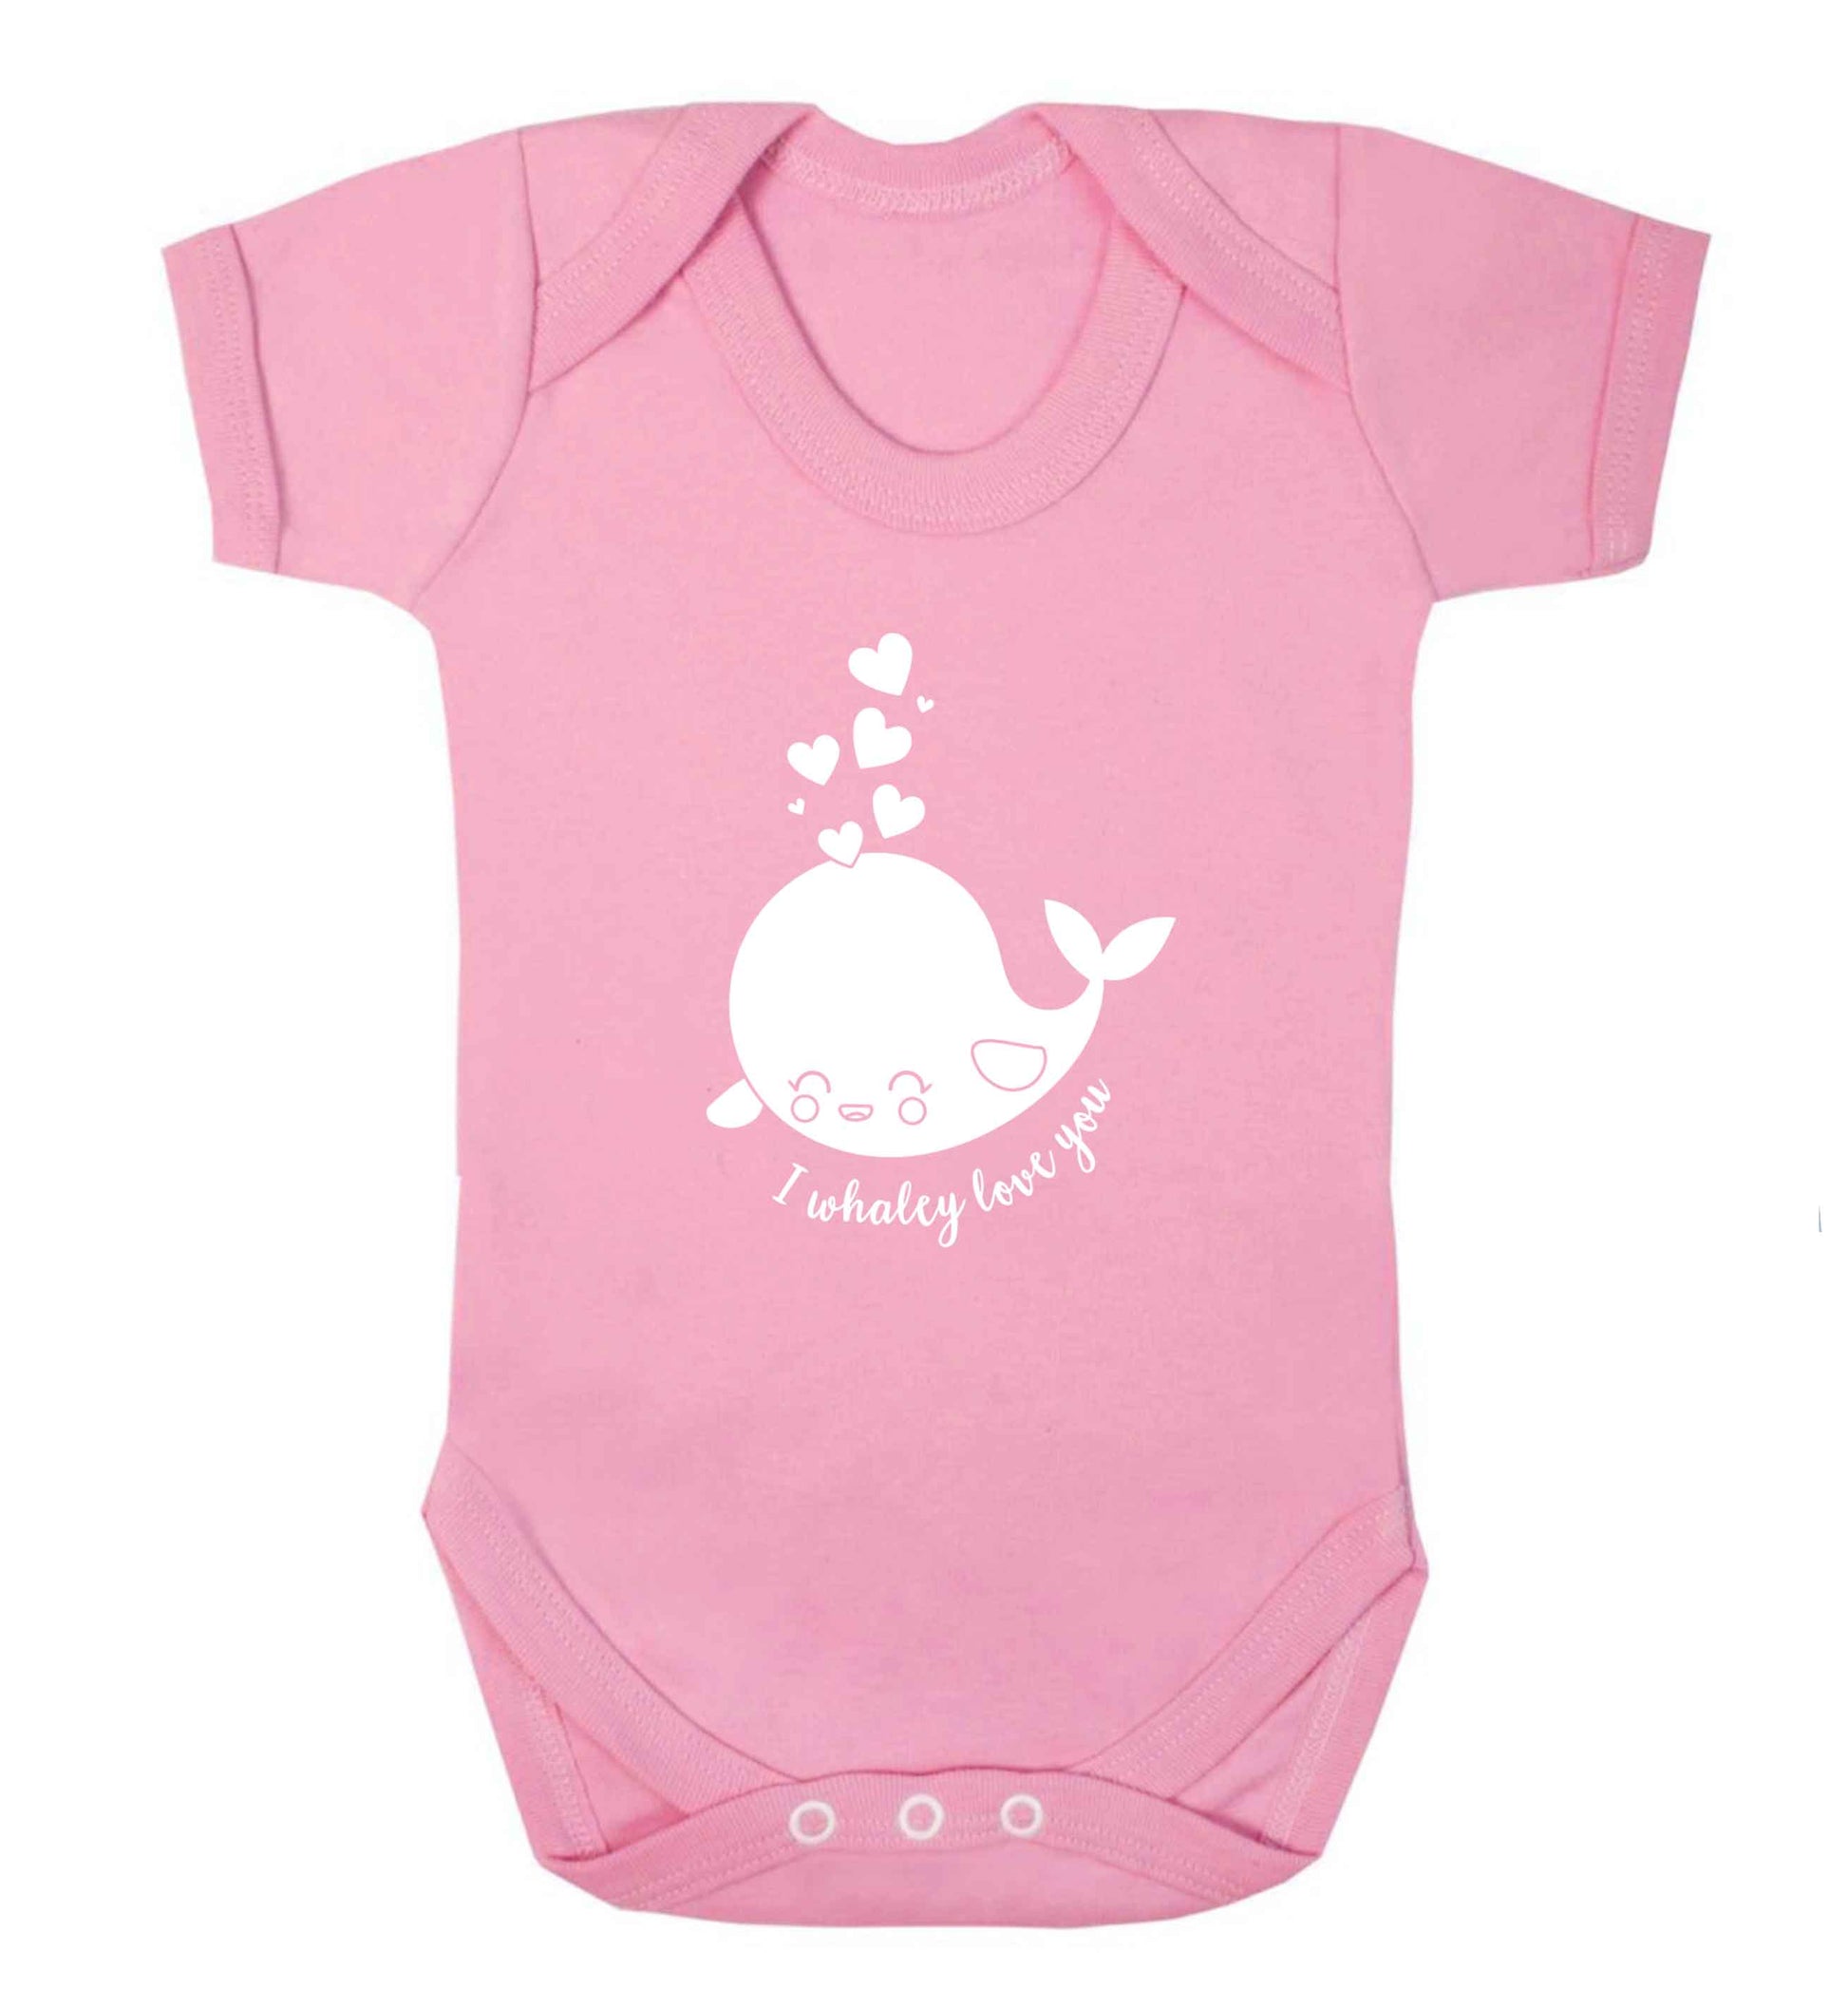 I whaley love you baby vest pale pink 18-24 months